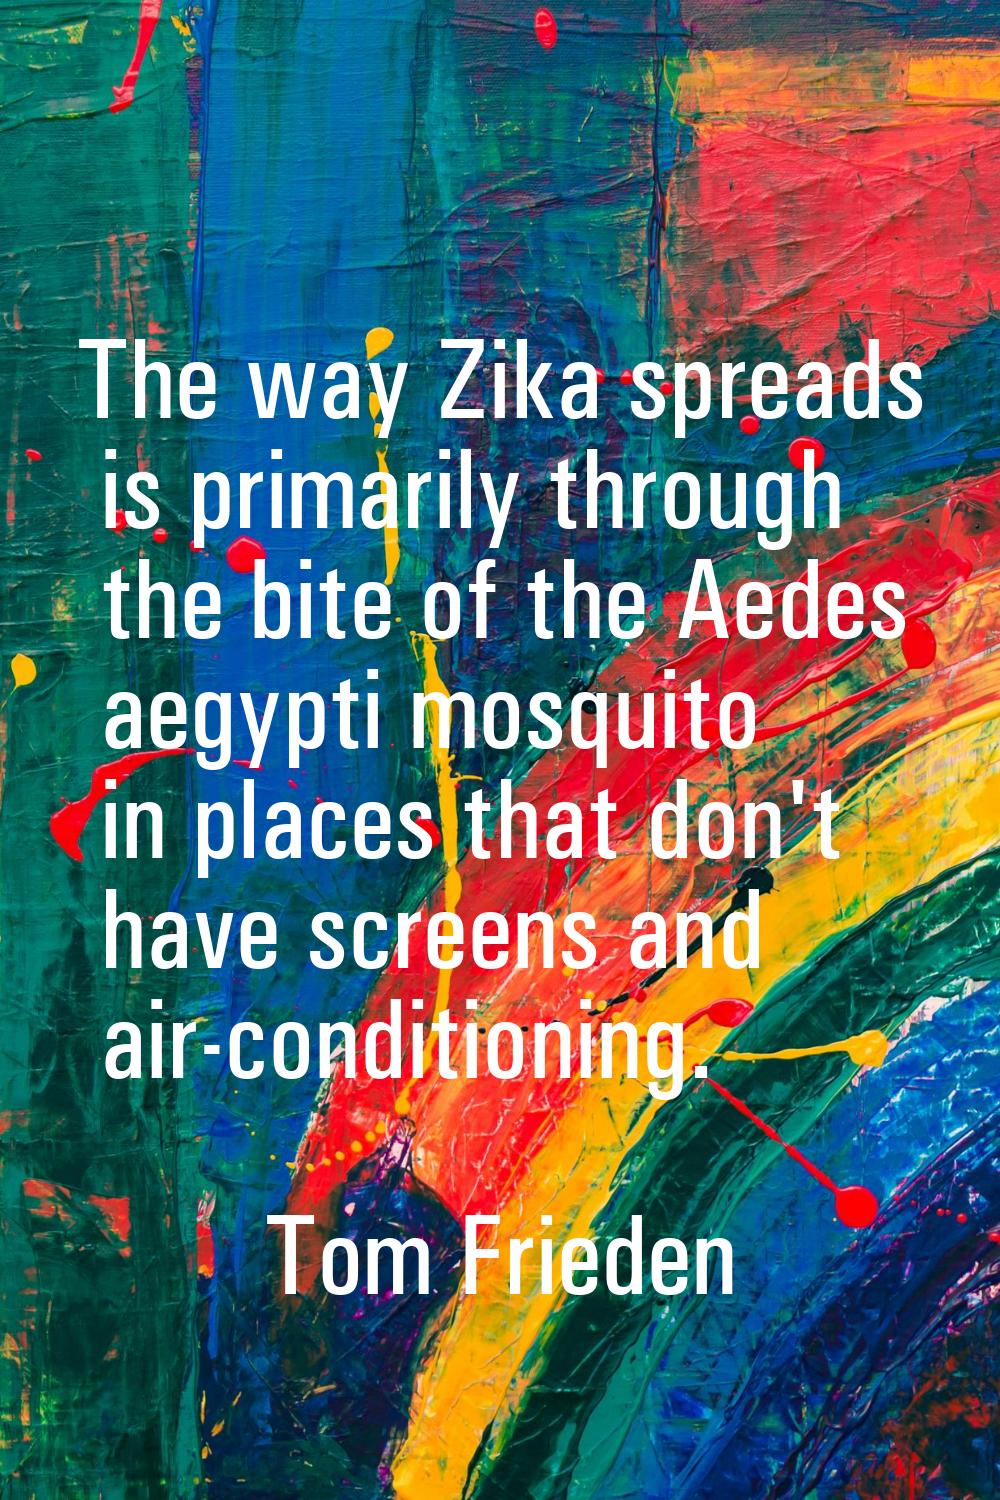 The way Zika spreads is primarily through the bite of the Aedes aegypti mosquito in places that don